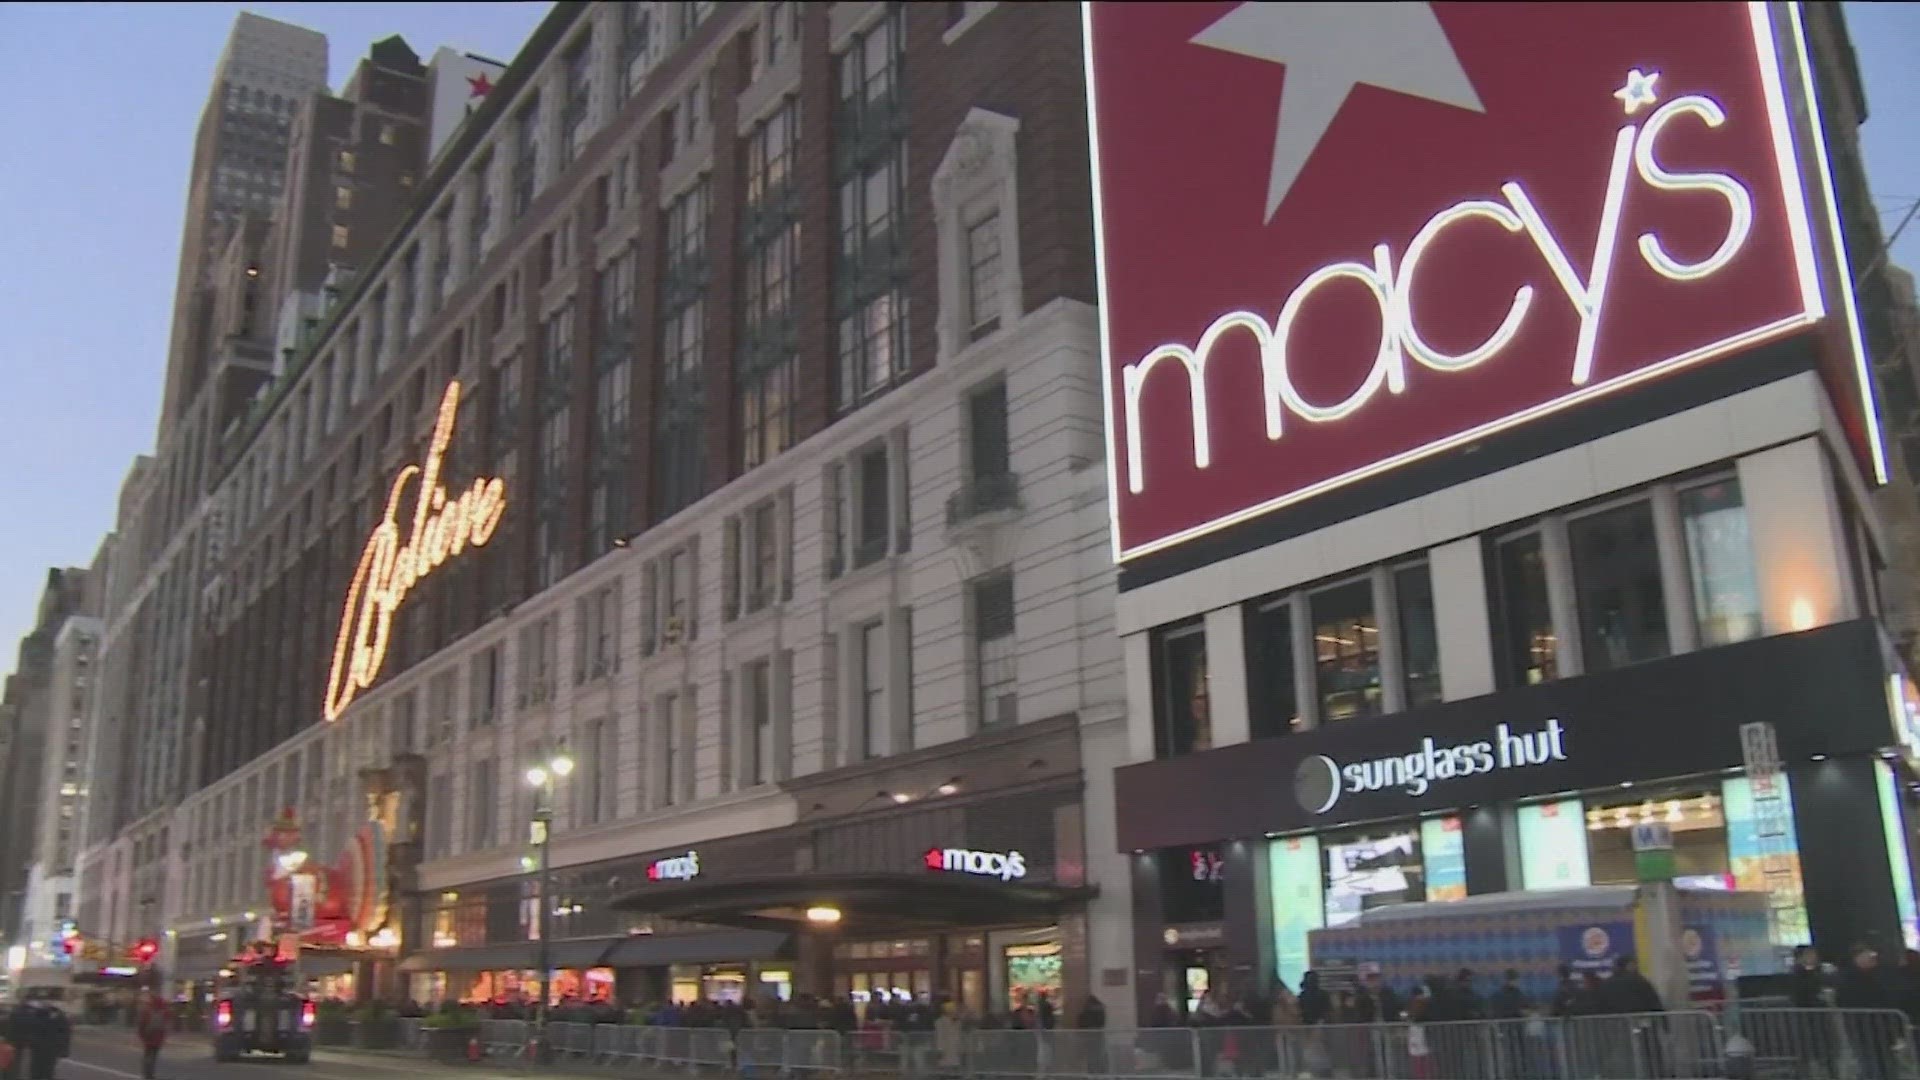 Macy's is closing 150 of its department stores.